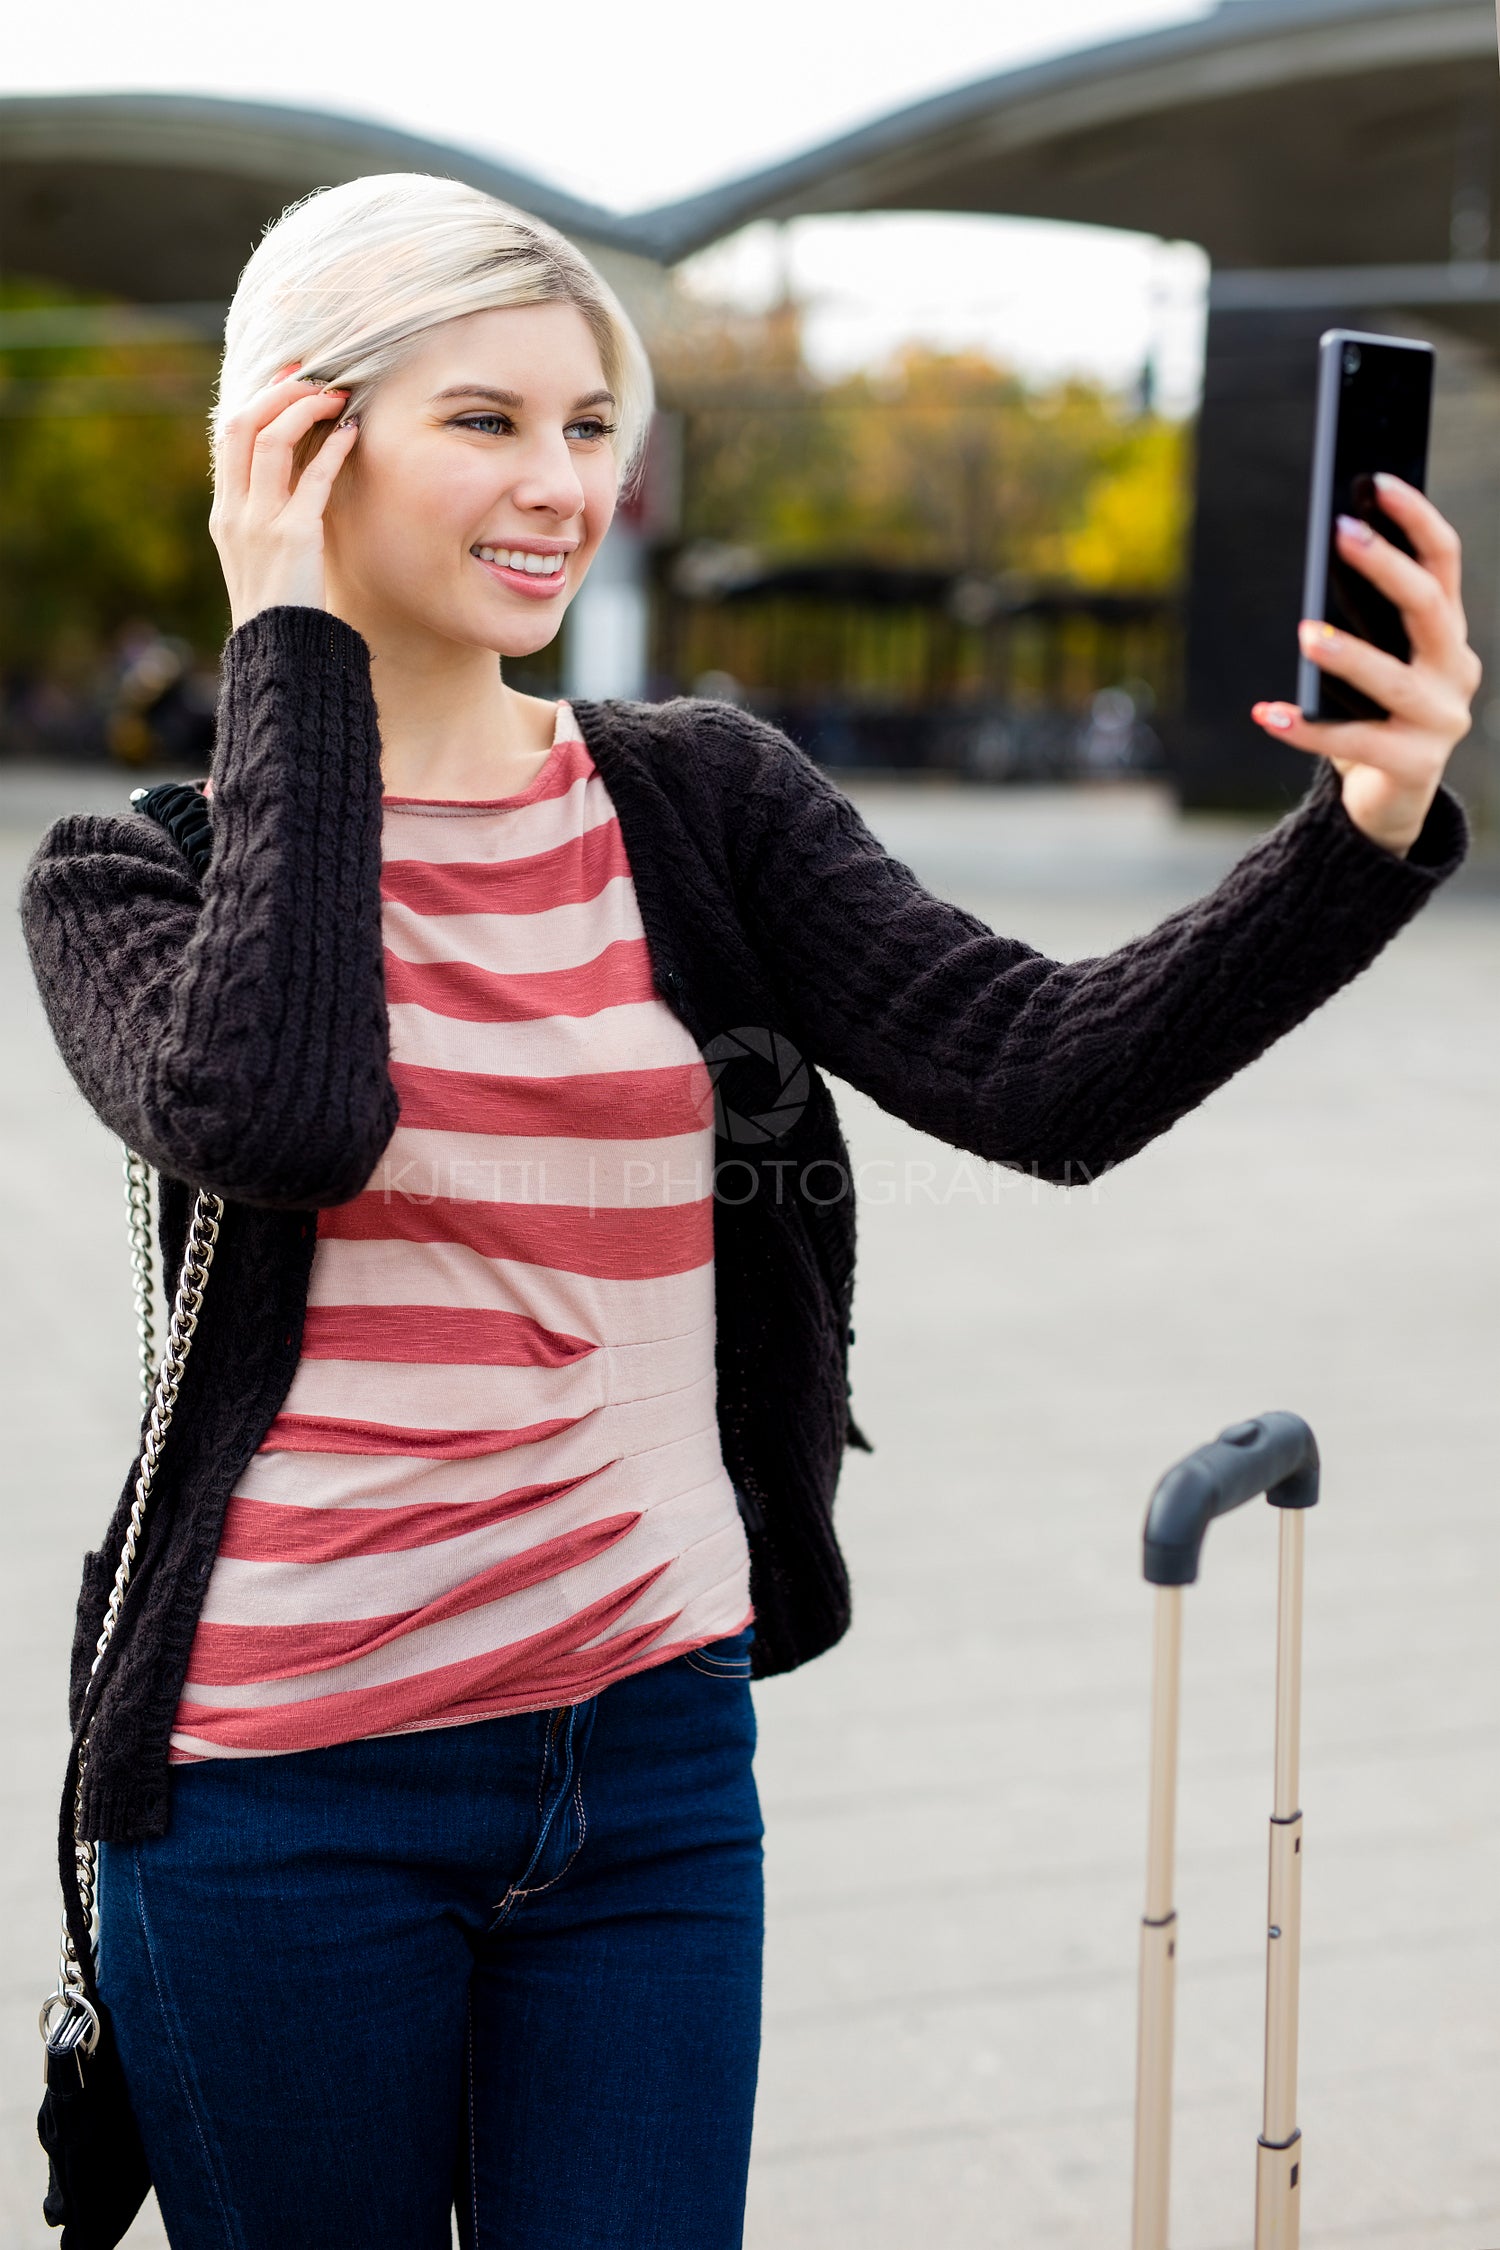 Woman Taking Selfie With Mobile Phone Outside Railroad Station